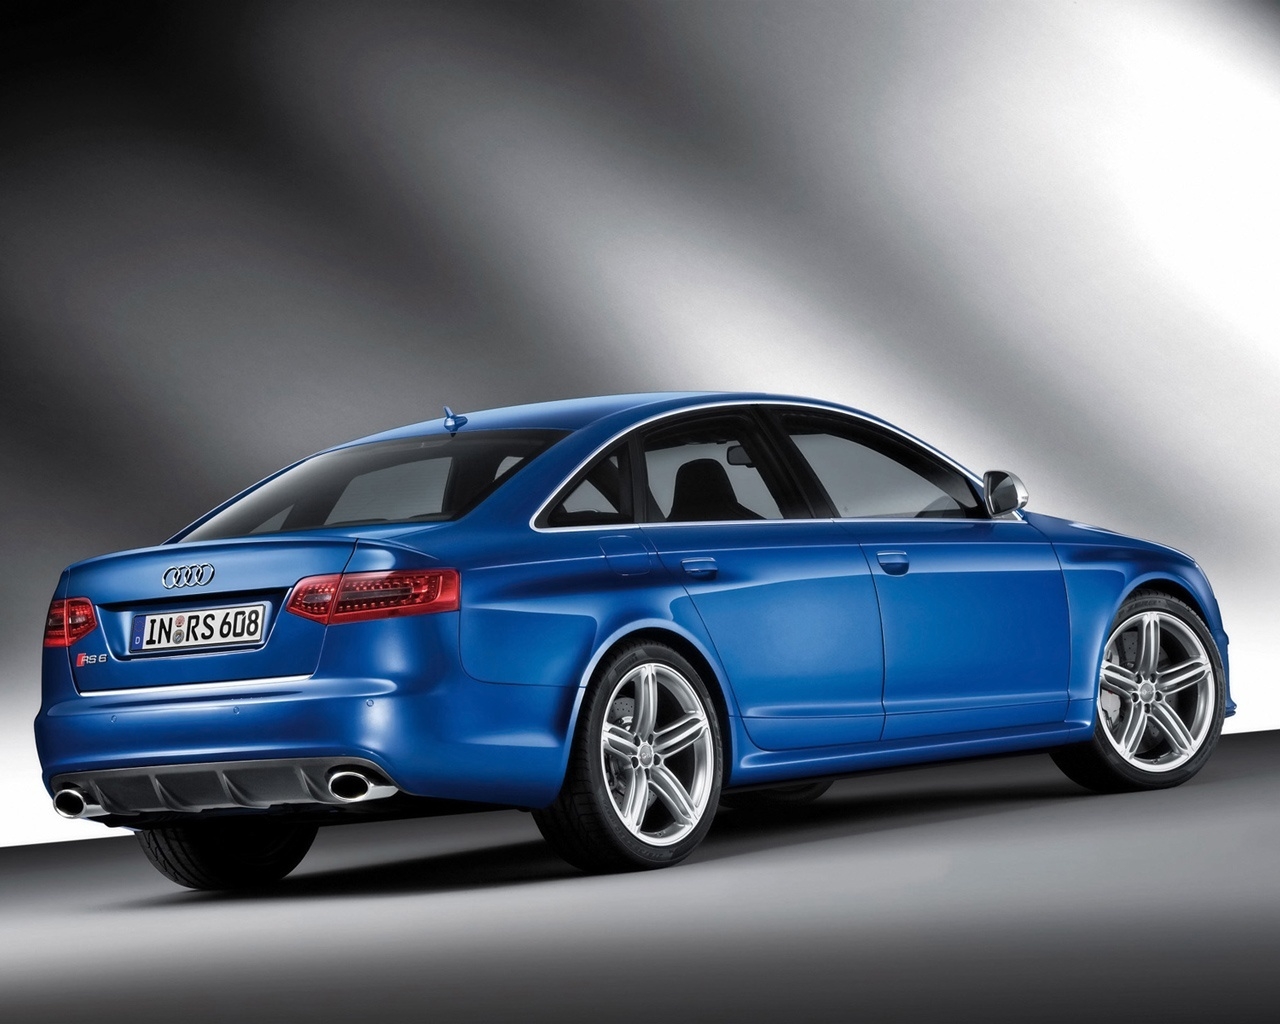 2009 Audi RS 6 - Rear And Side Tilt for 1280 x 1024 resolution